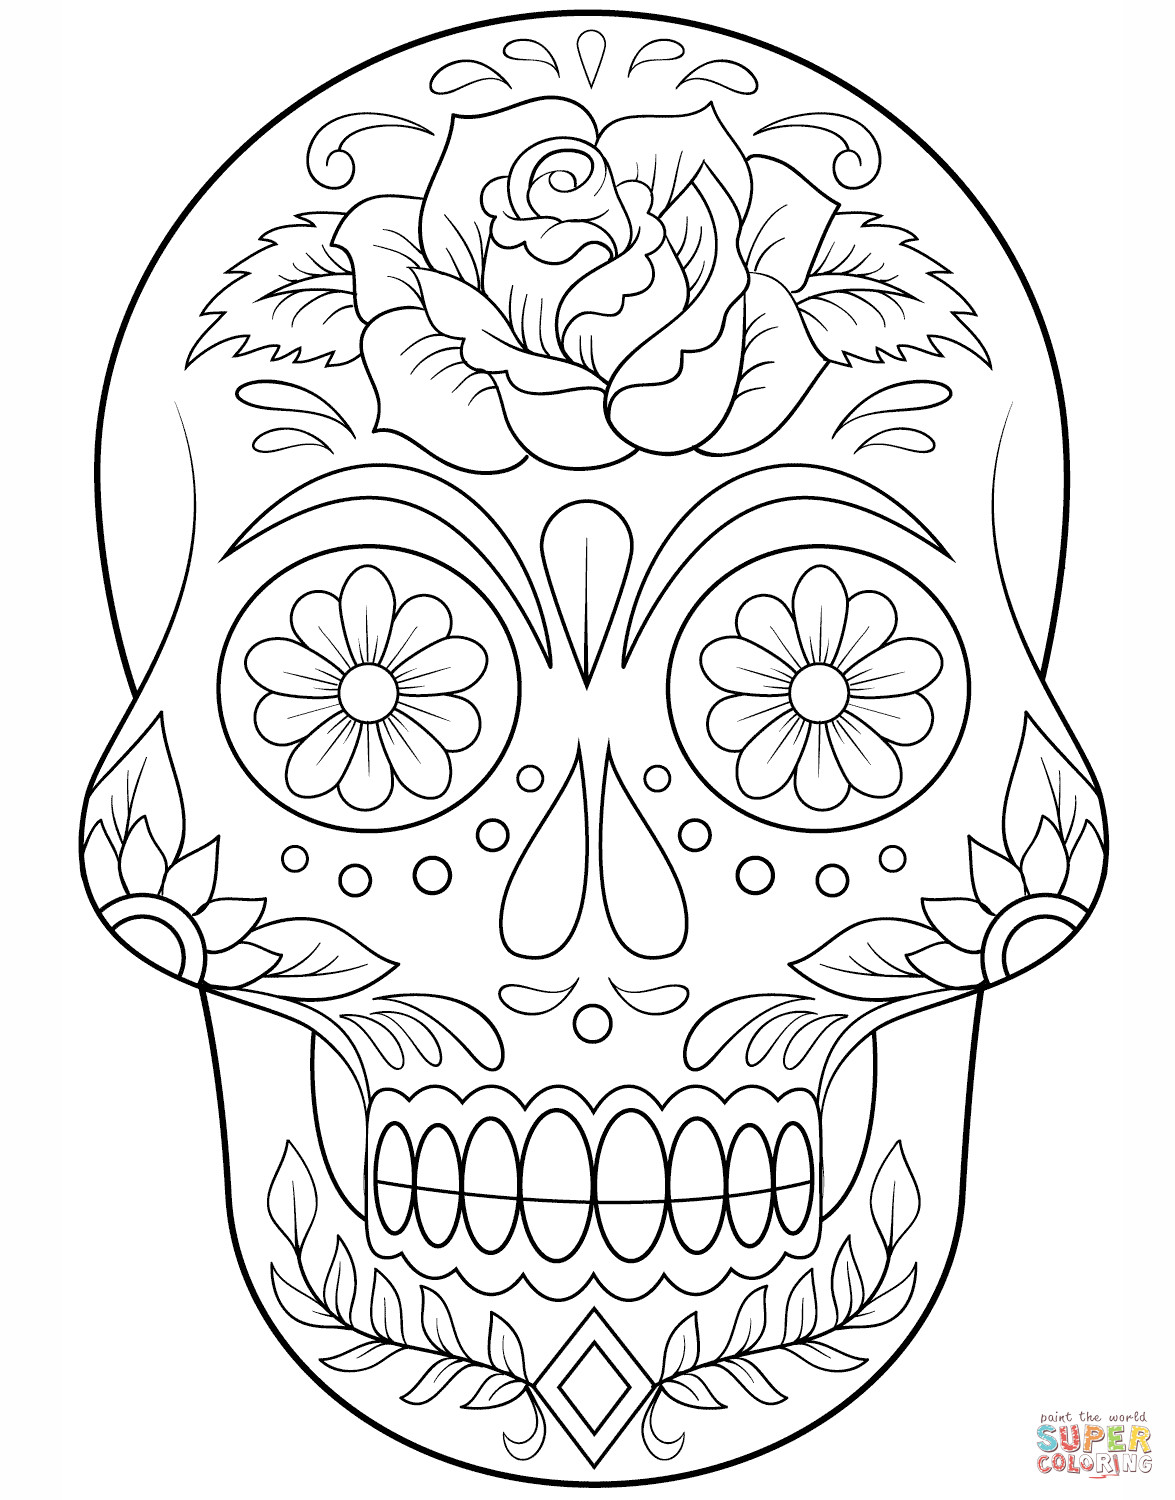 Printable Sugar Skulls Coloring Pages
 Sugar Skull with Flowers coloring page